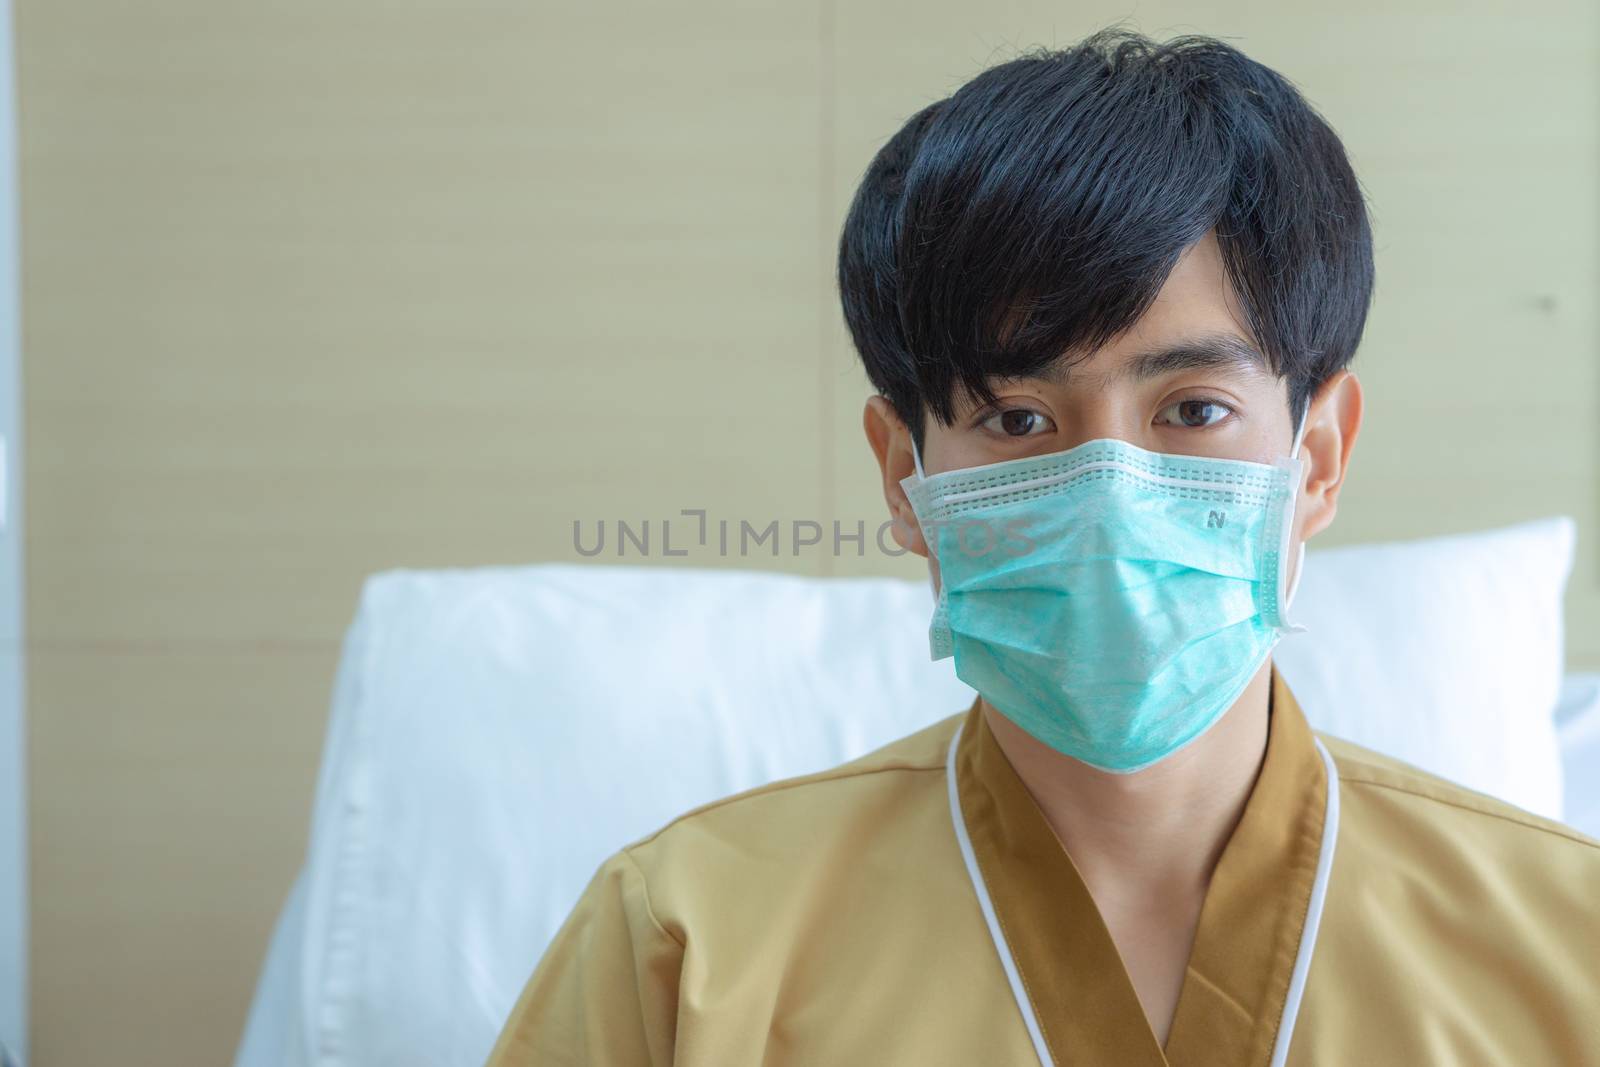 A patient man wearing face mask to prevent illness spread out at hospital. Sick and health concept.